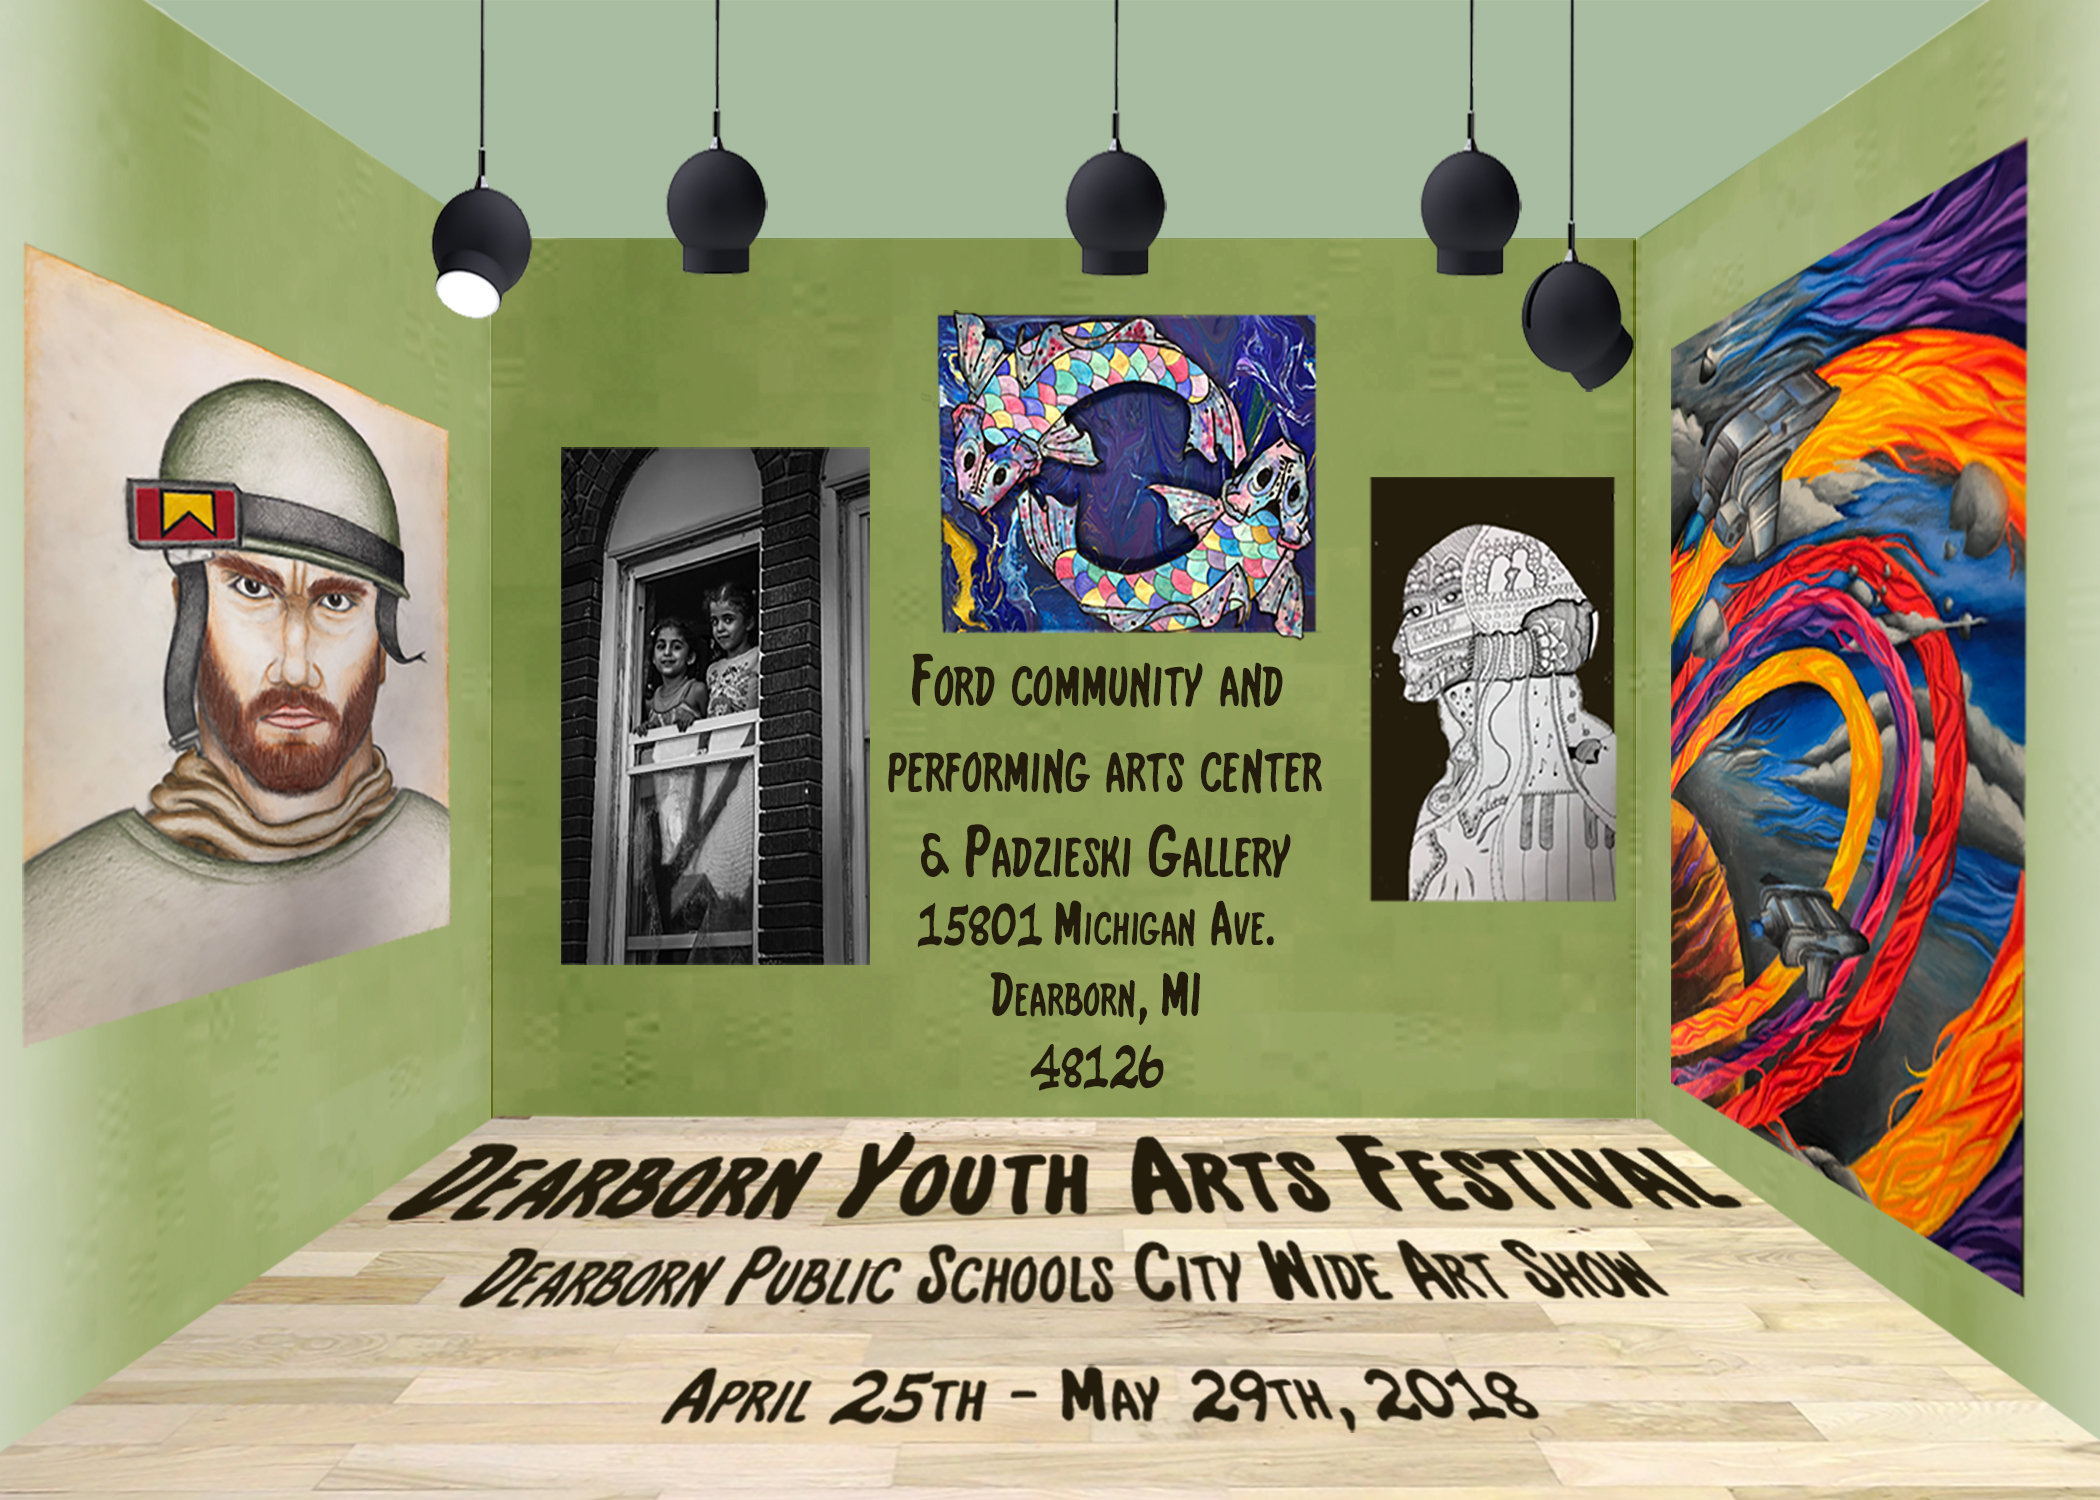 Dearborn Youth Arts Festival